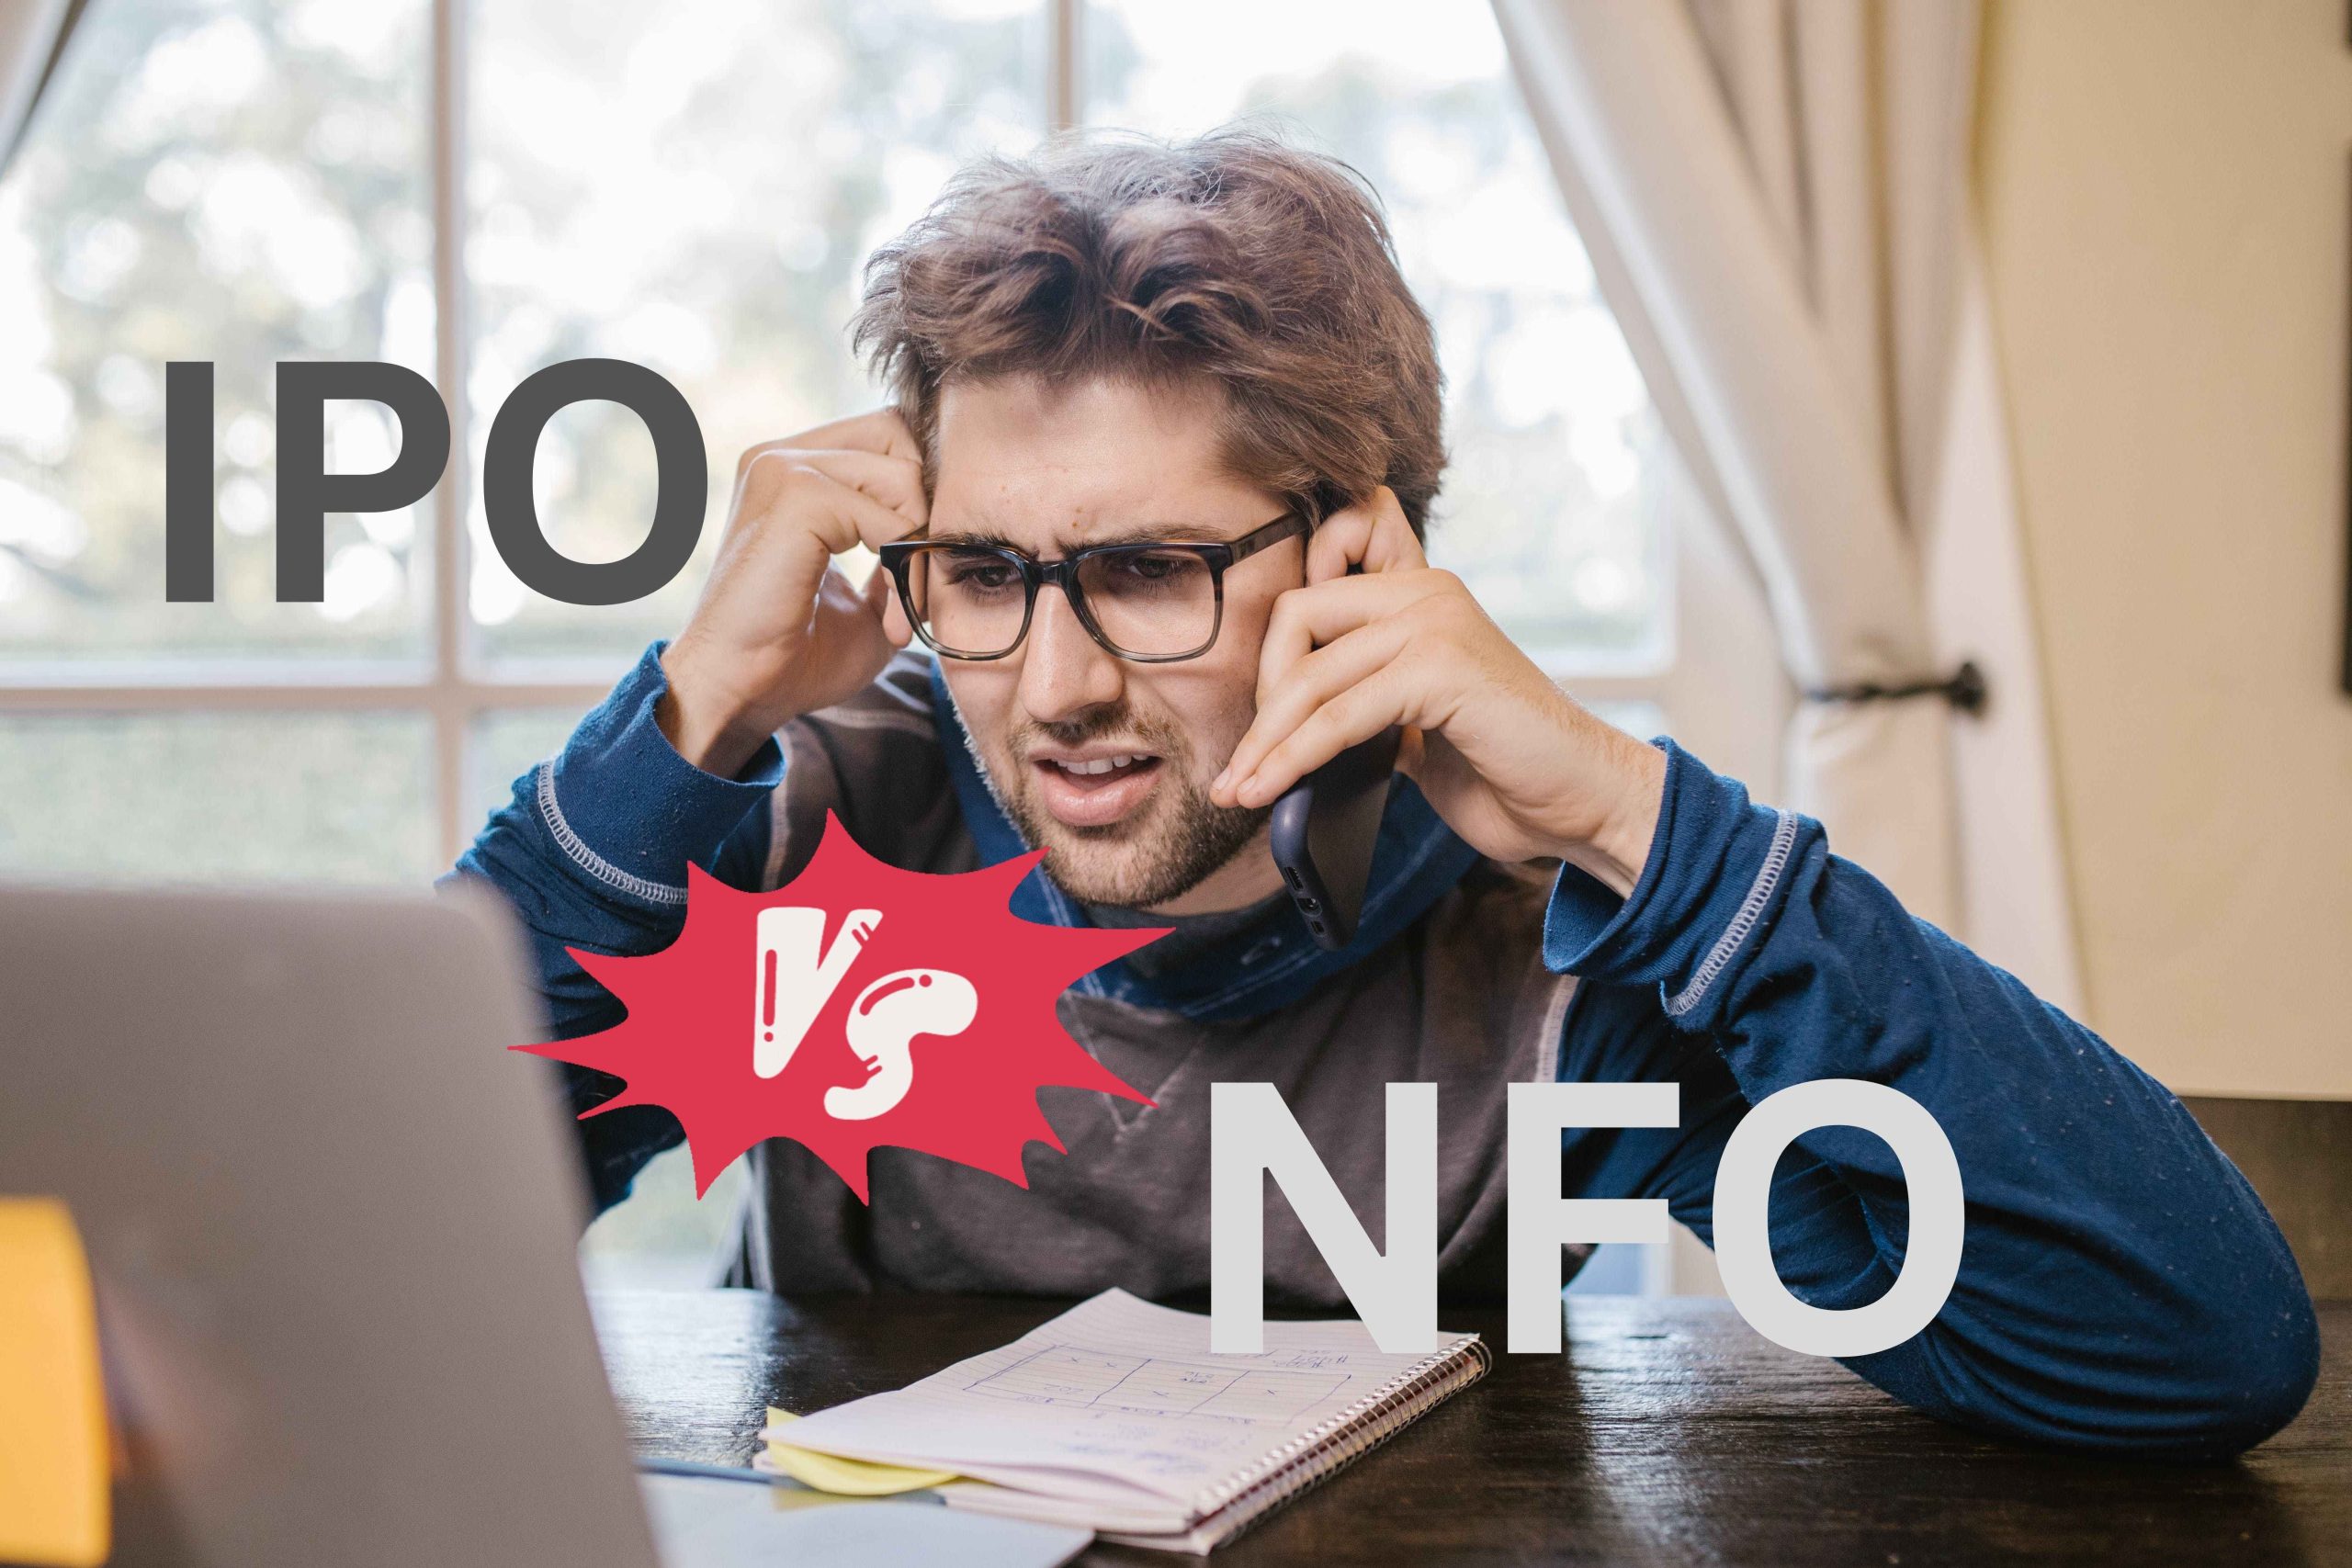 The Ultimate Guide to Understanding NFO vs. IPO